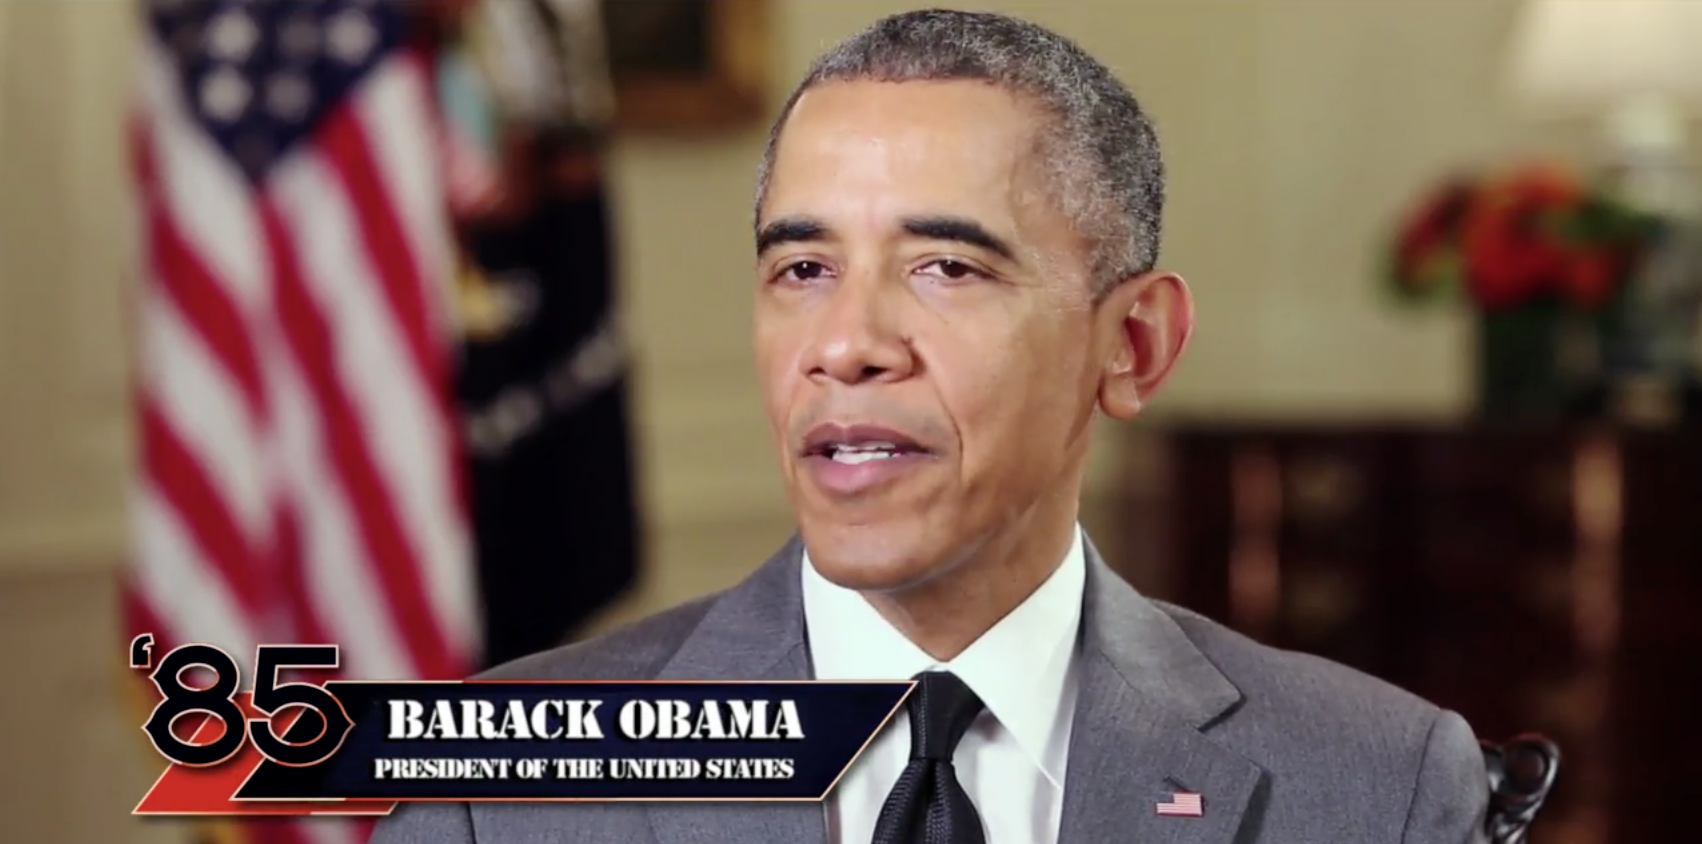 President Obama in “’85: The Story Of The Greatest Team in Pro Football History” 